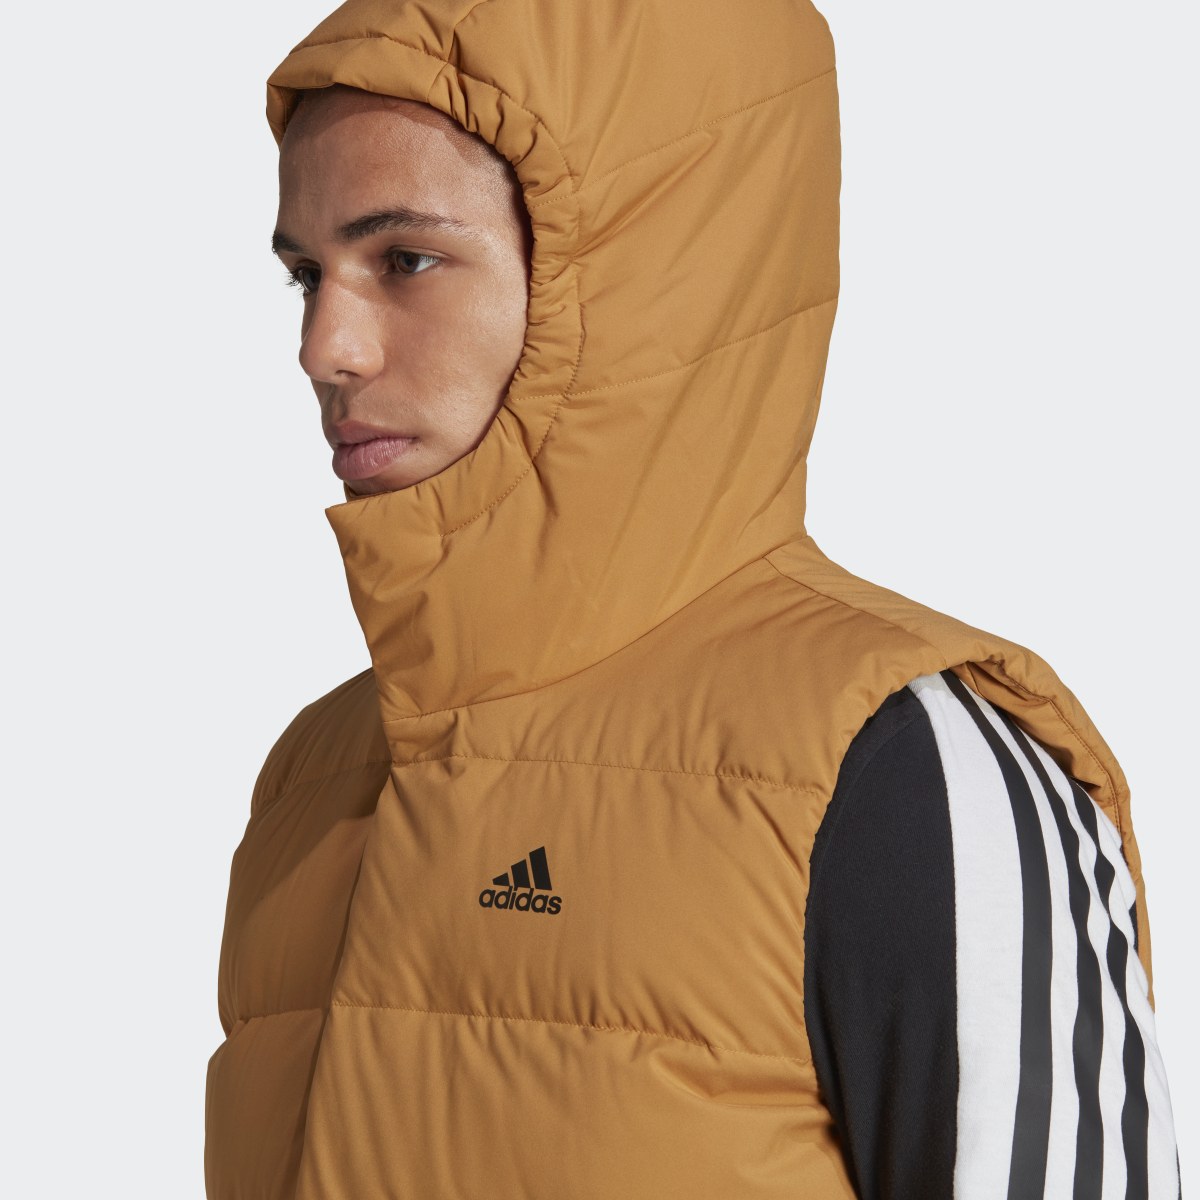 Adidas Helionic Hooded Down Vest. 8